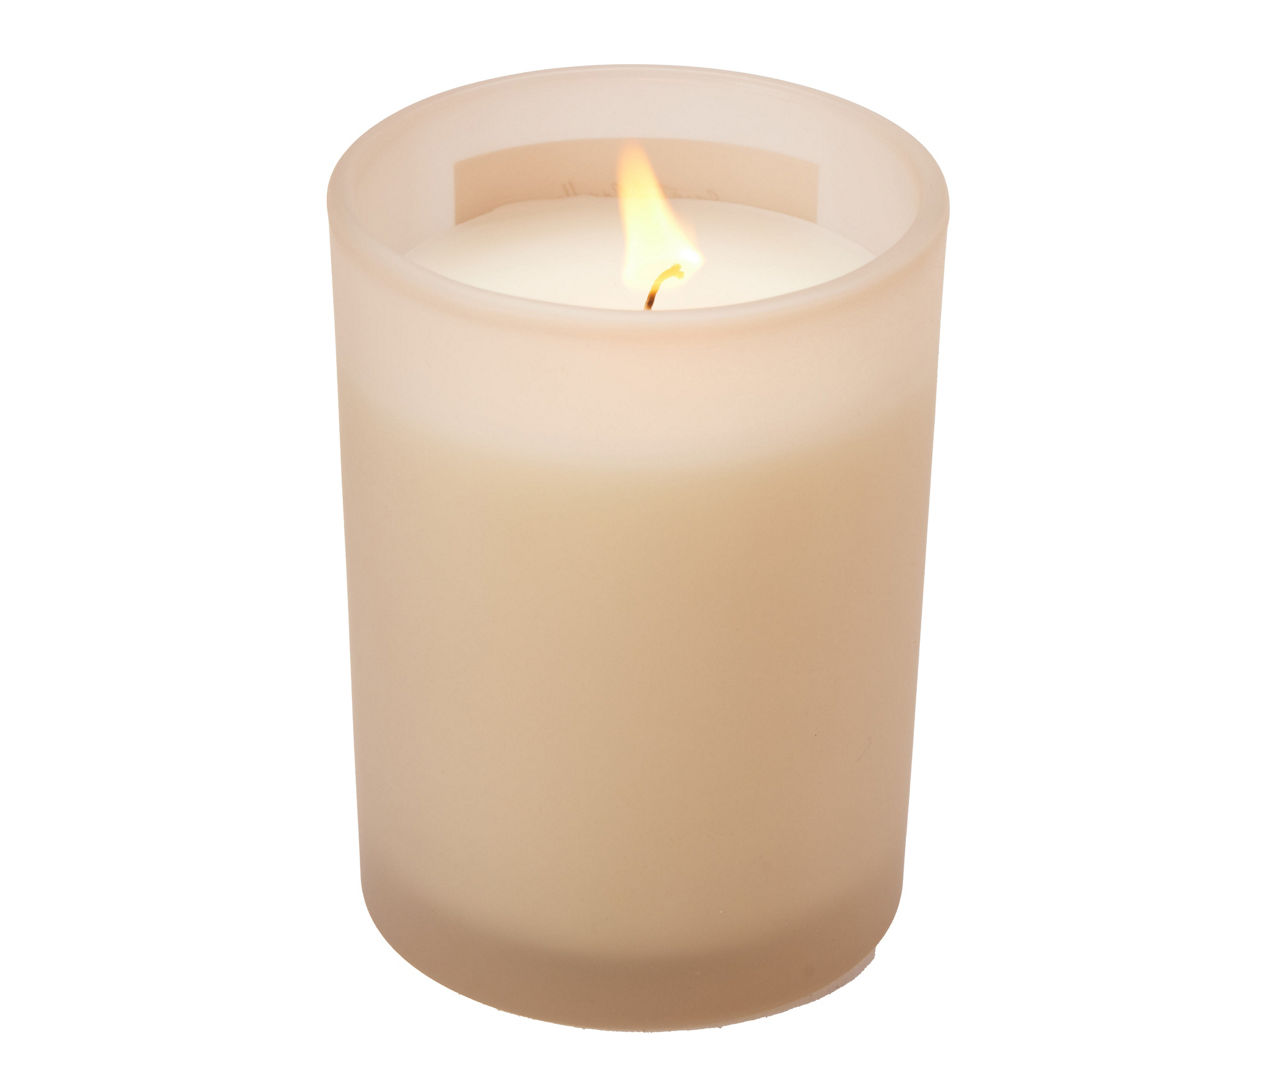 Brushed Suede Candle, 8.5 Oz. | Big Lots